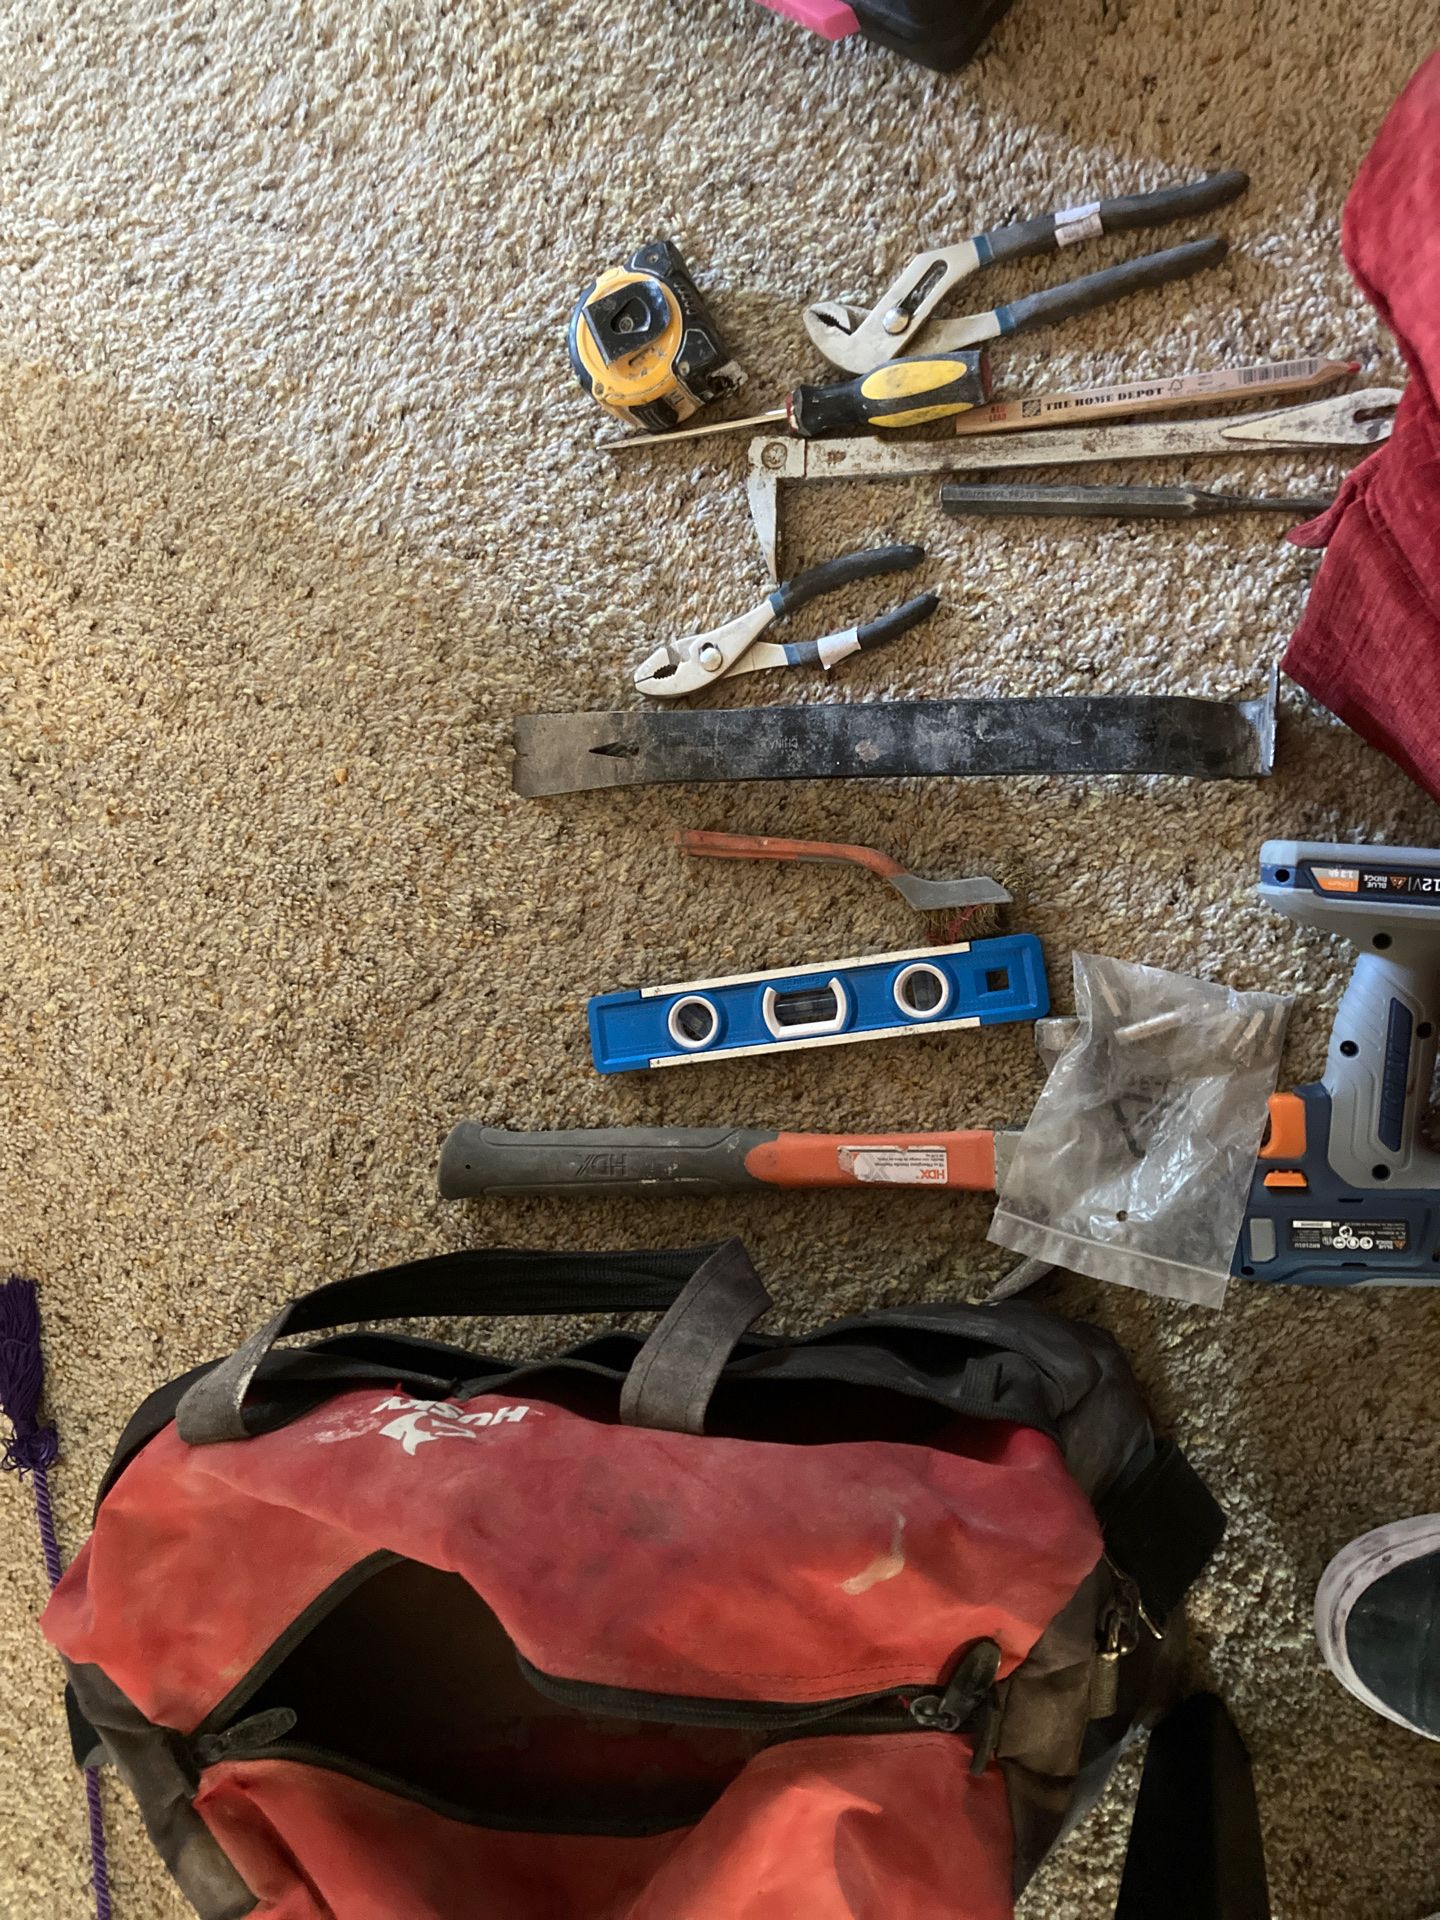 Tools with tool bag.